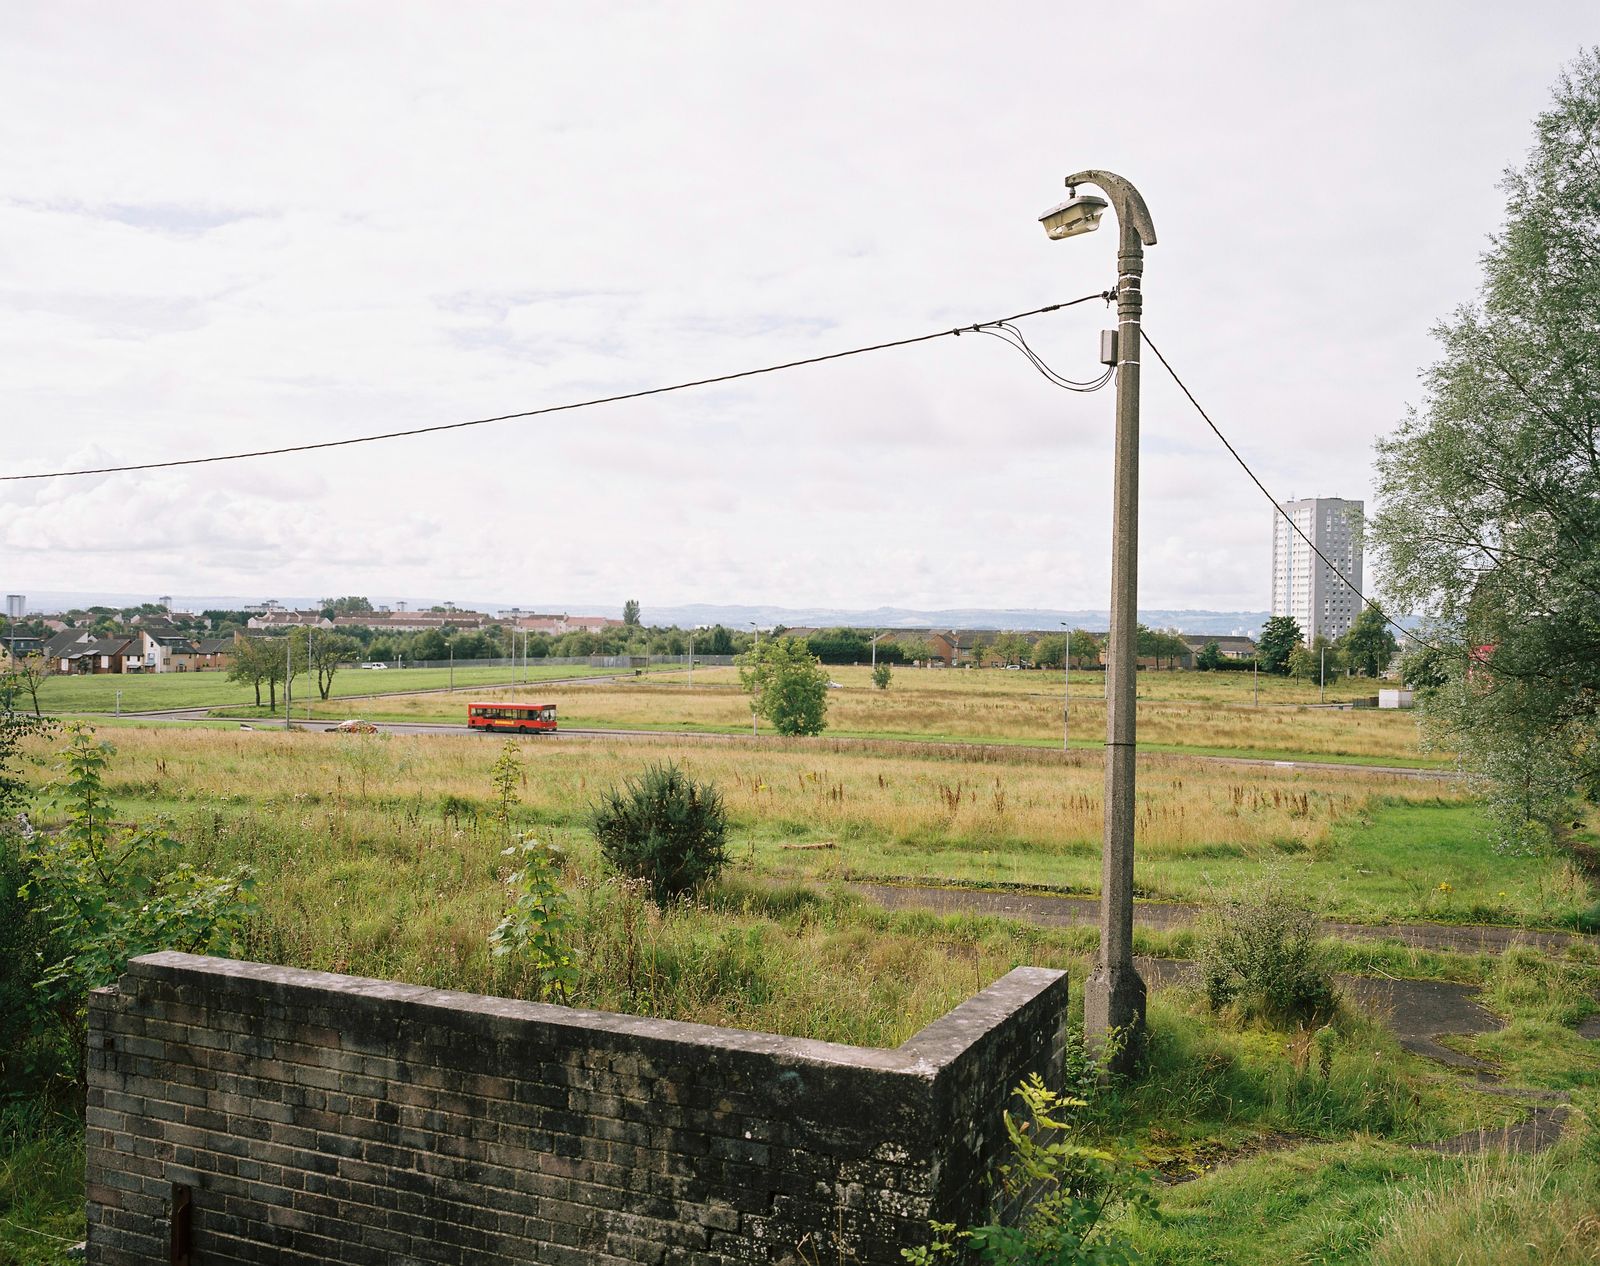 © Kirsty Mackay - Drumchapel looking across the now empty streets where council housing once stood.